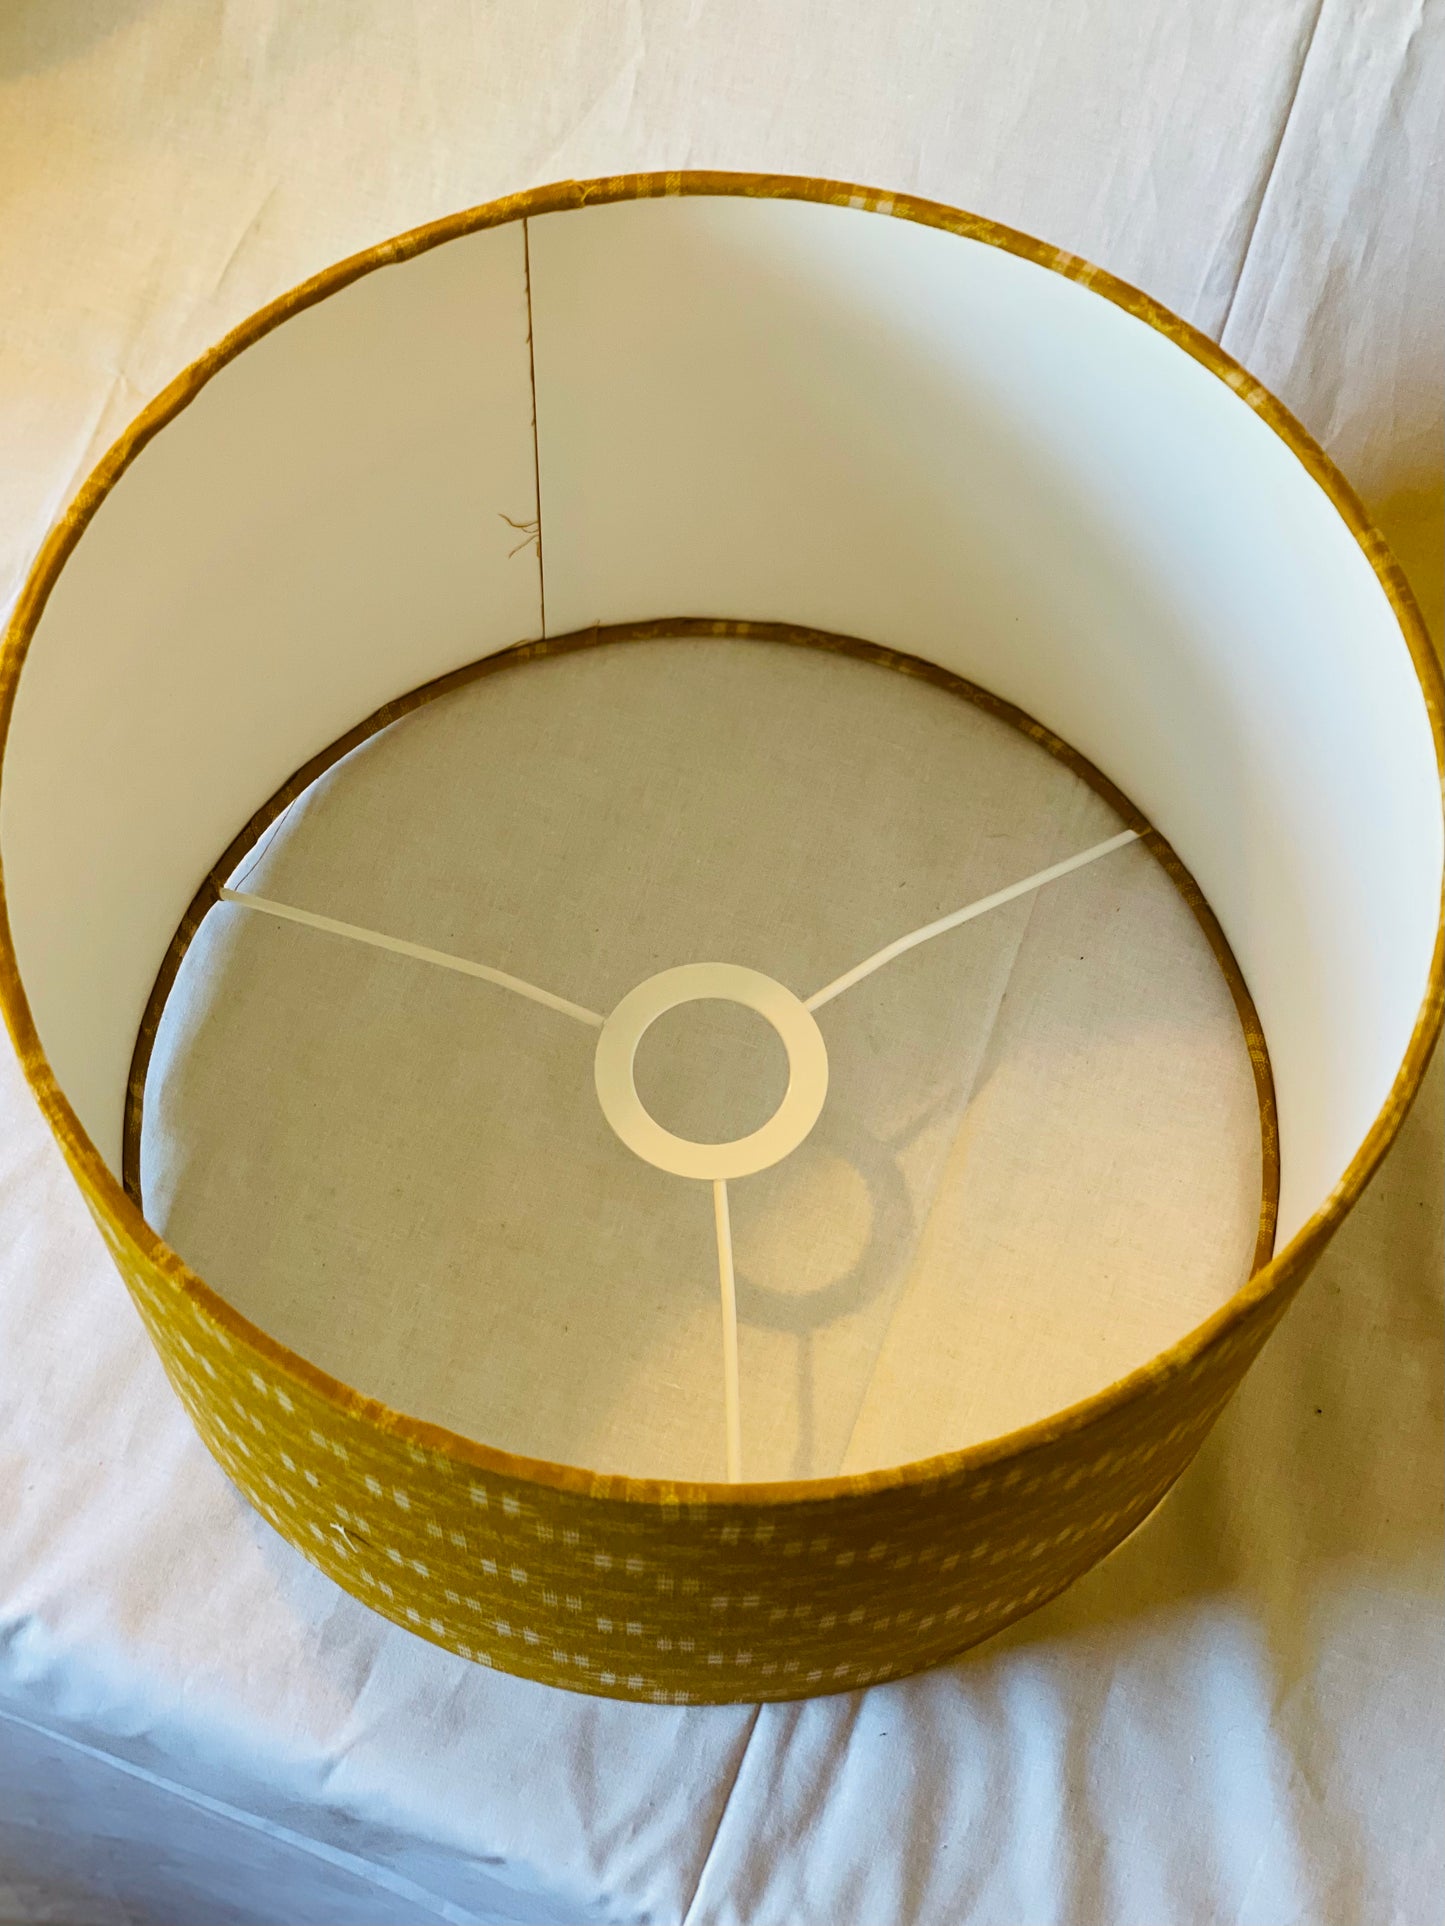 12 Inch Drum Lampshade. Traditional Japanese Design. Harvest Gold with Ecru Hashtag Motif.